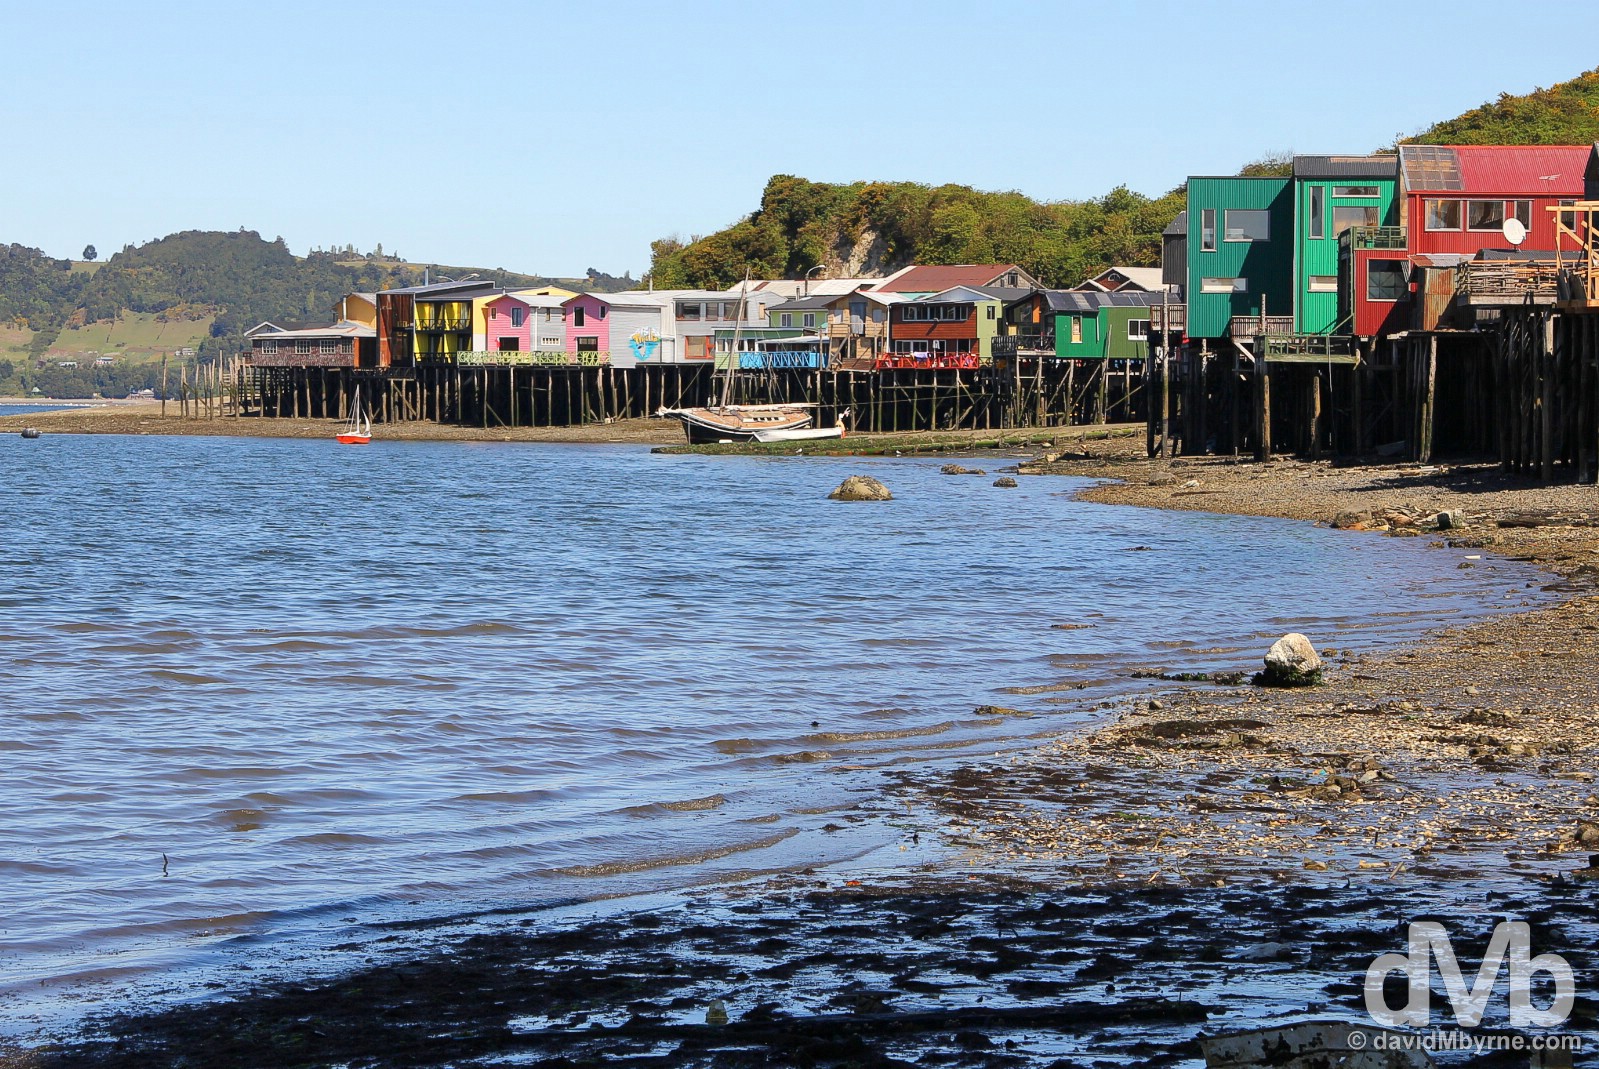 Palafitos at low tide in Castro, Chiloe, Chile. October 22, 2015.